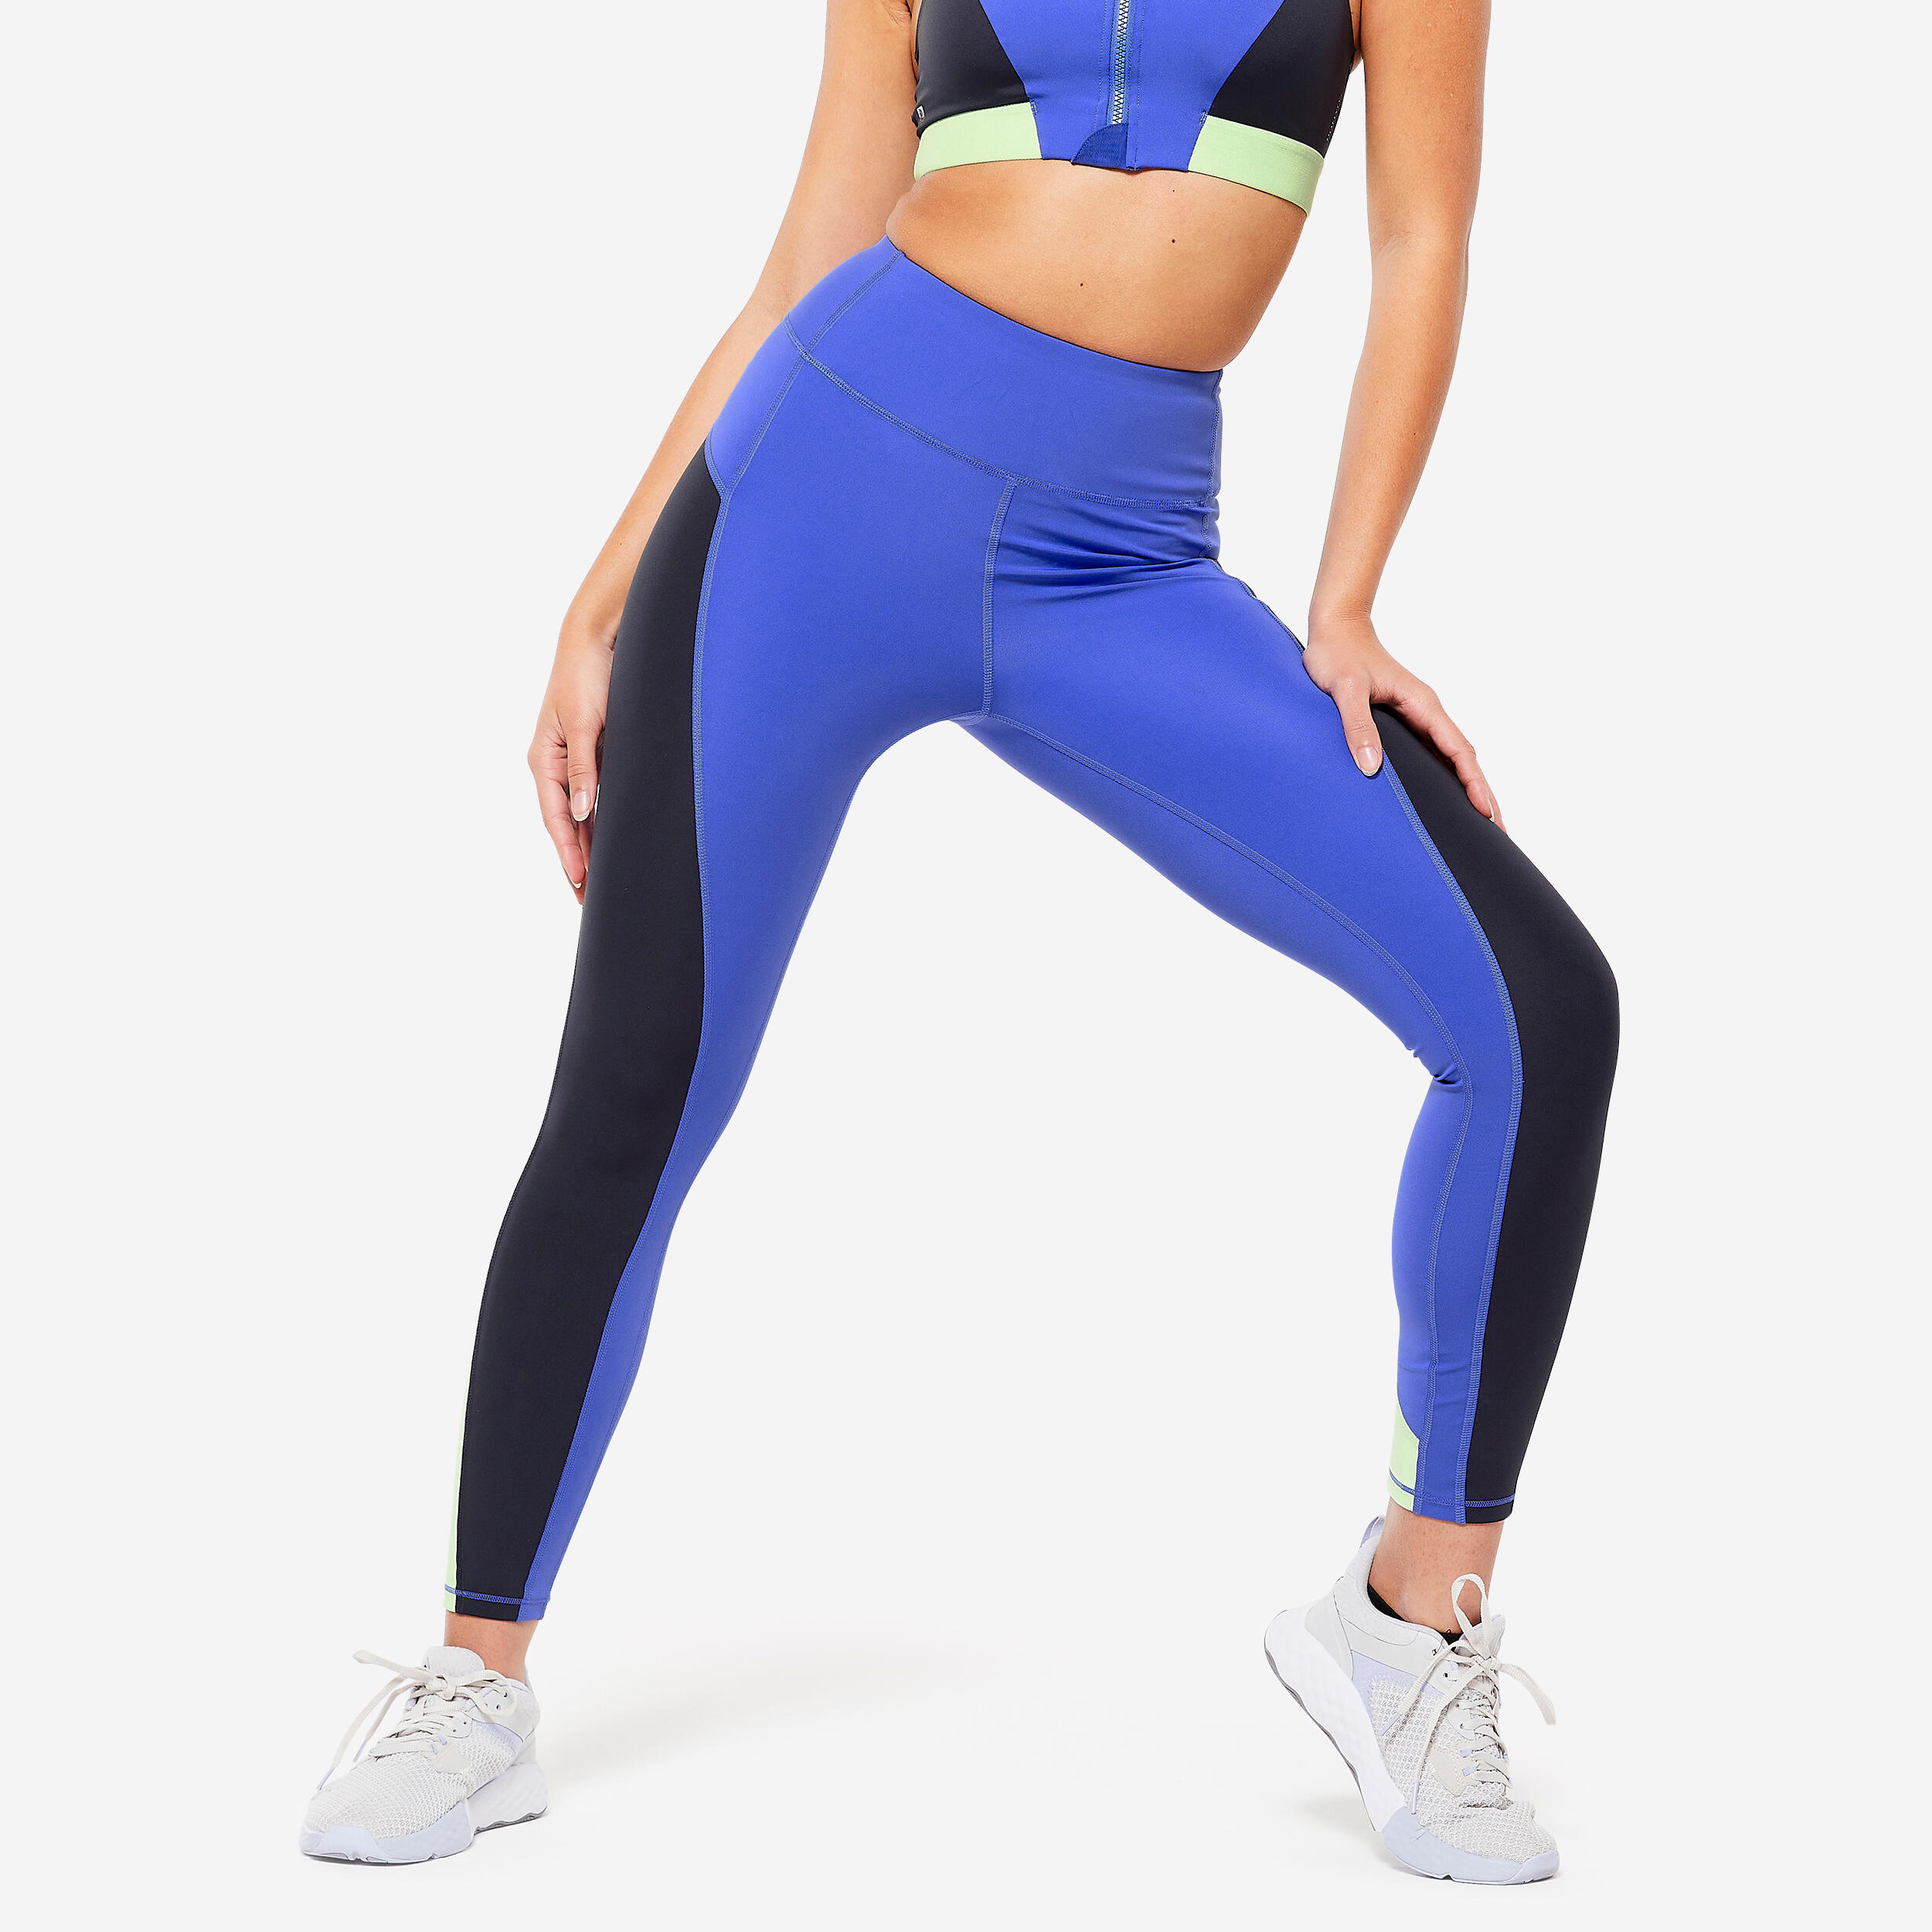 Sports Bra High Support with Zip - Purple